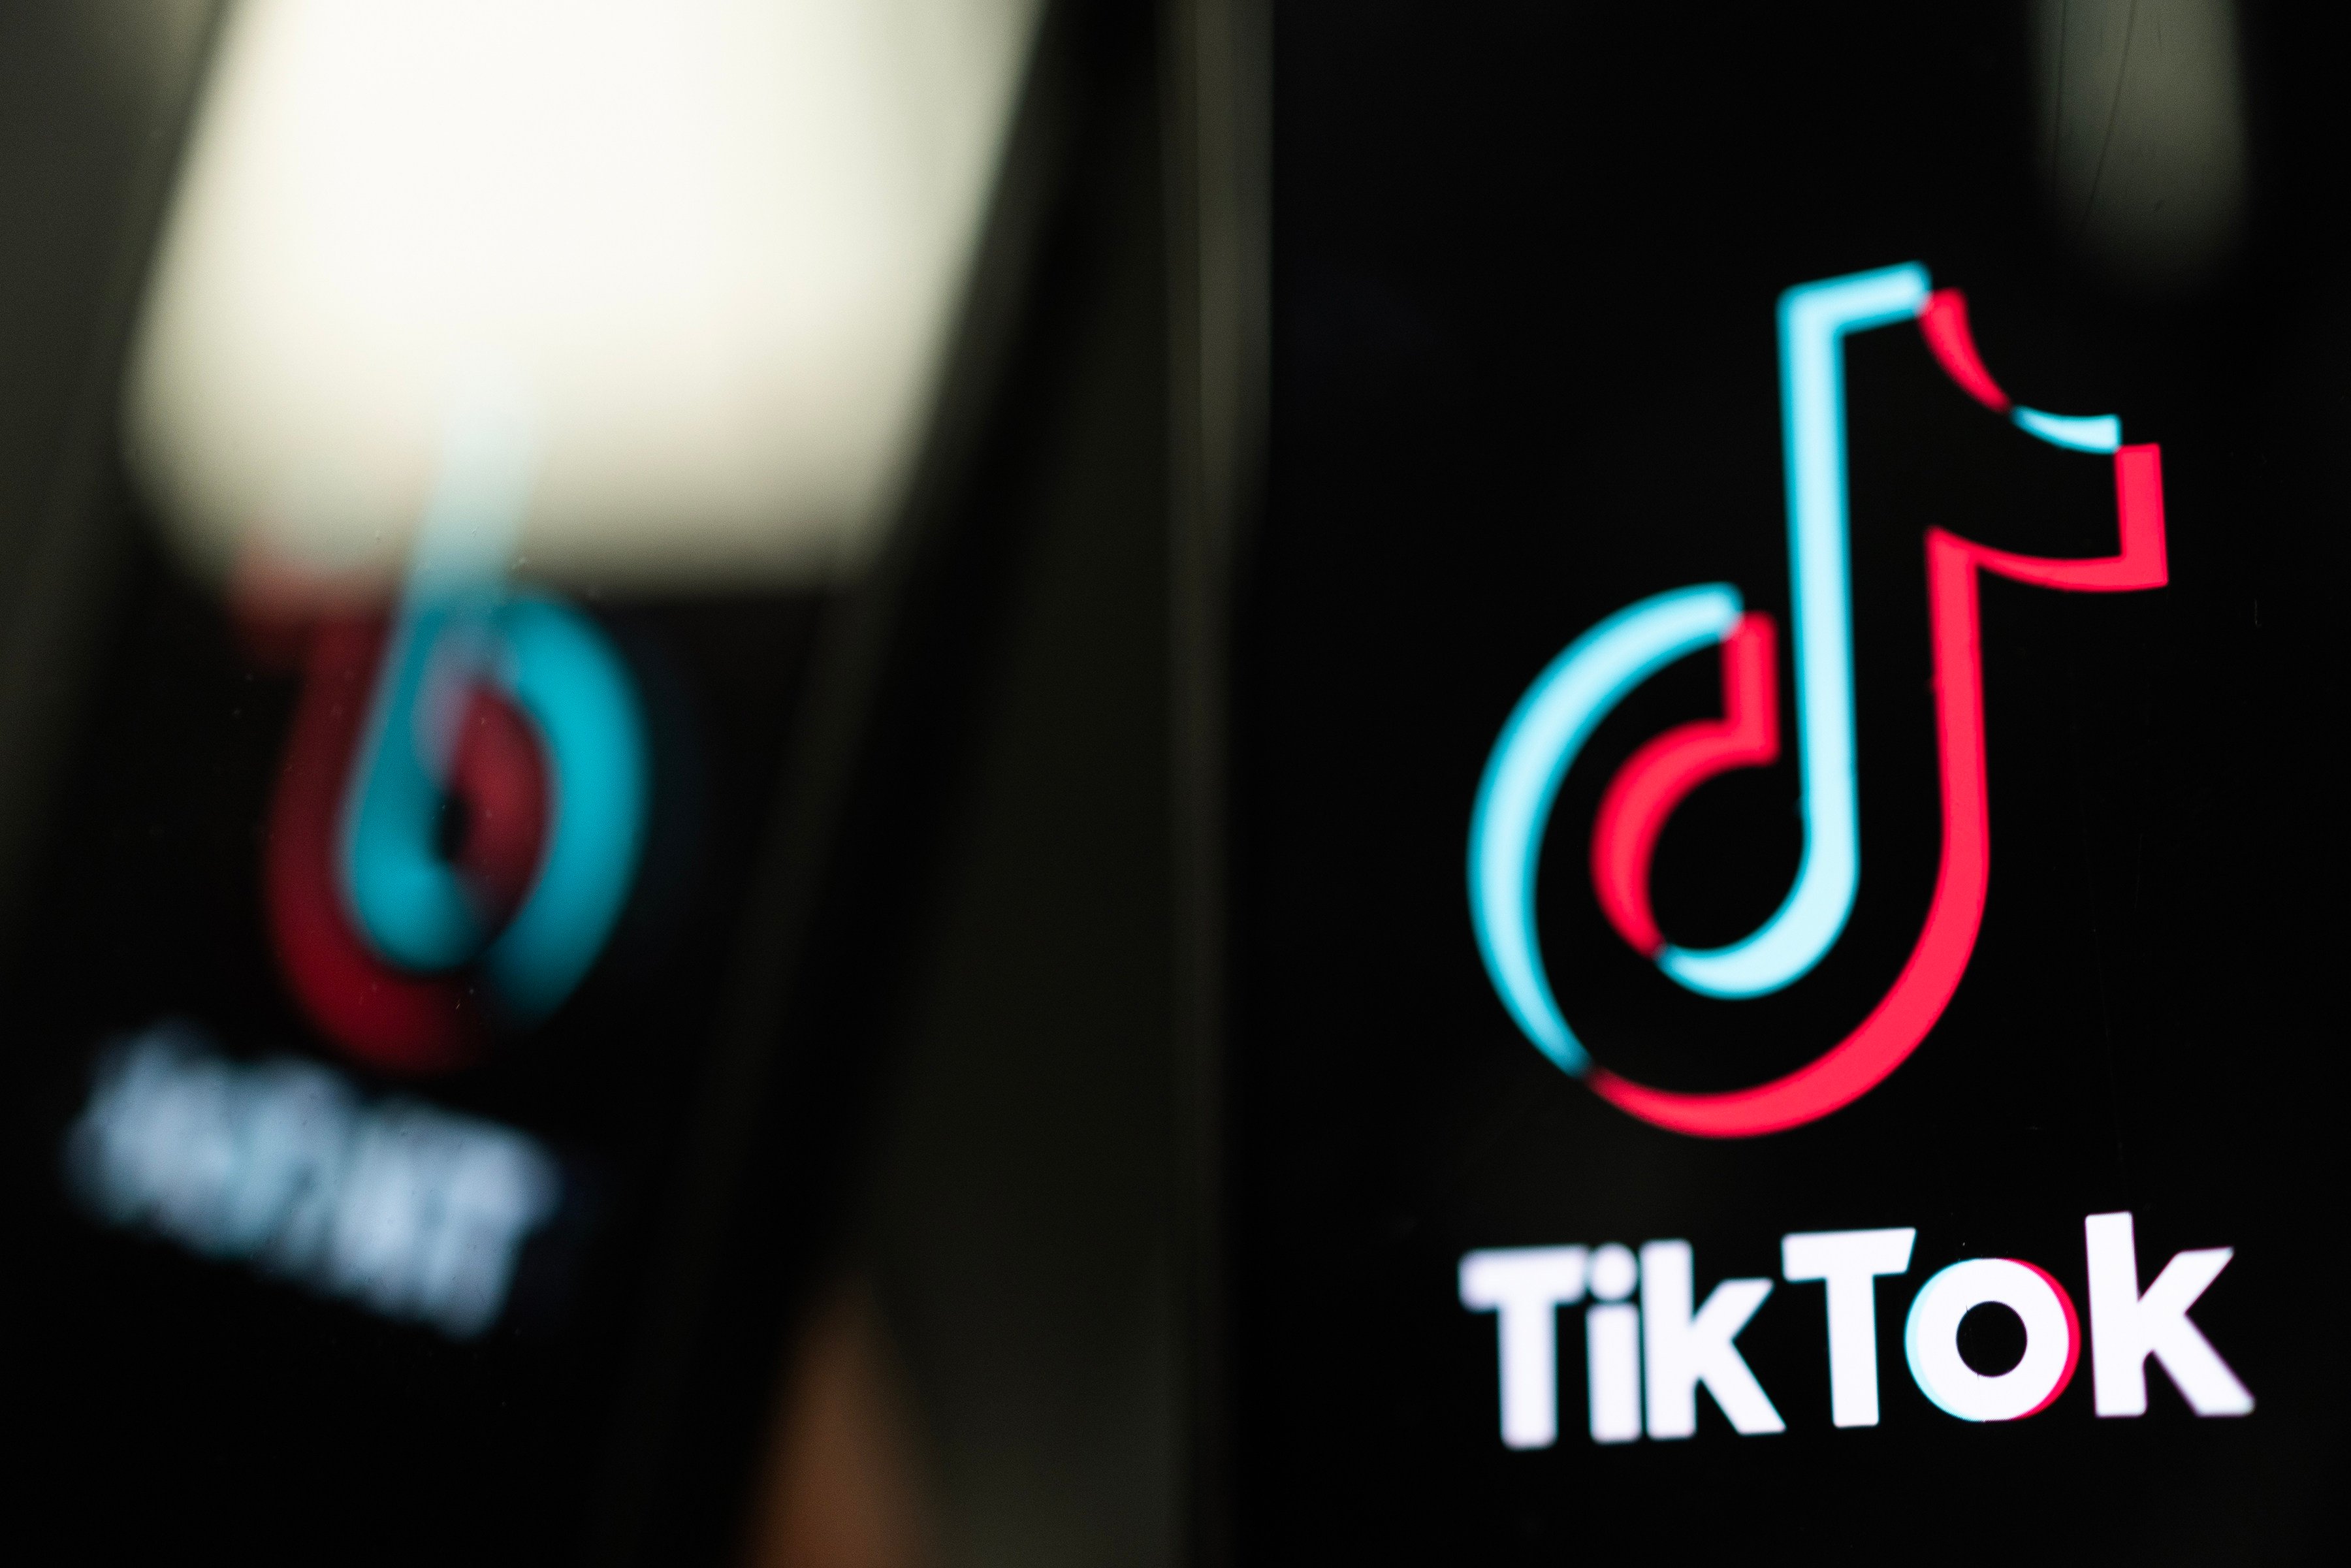 The TikTok logo is displayed on an iPhone screen in London on February 28, 2023. Photo: TNS